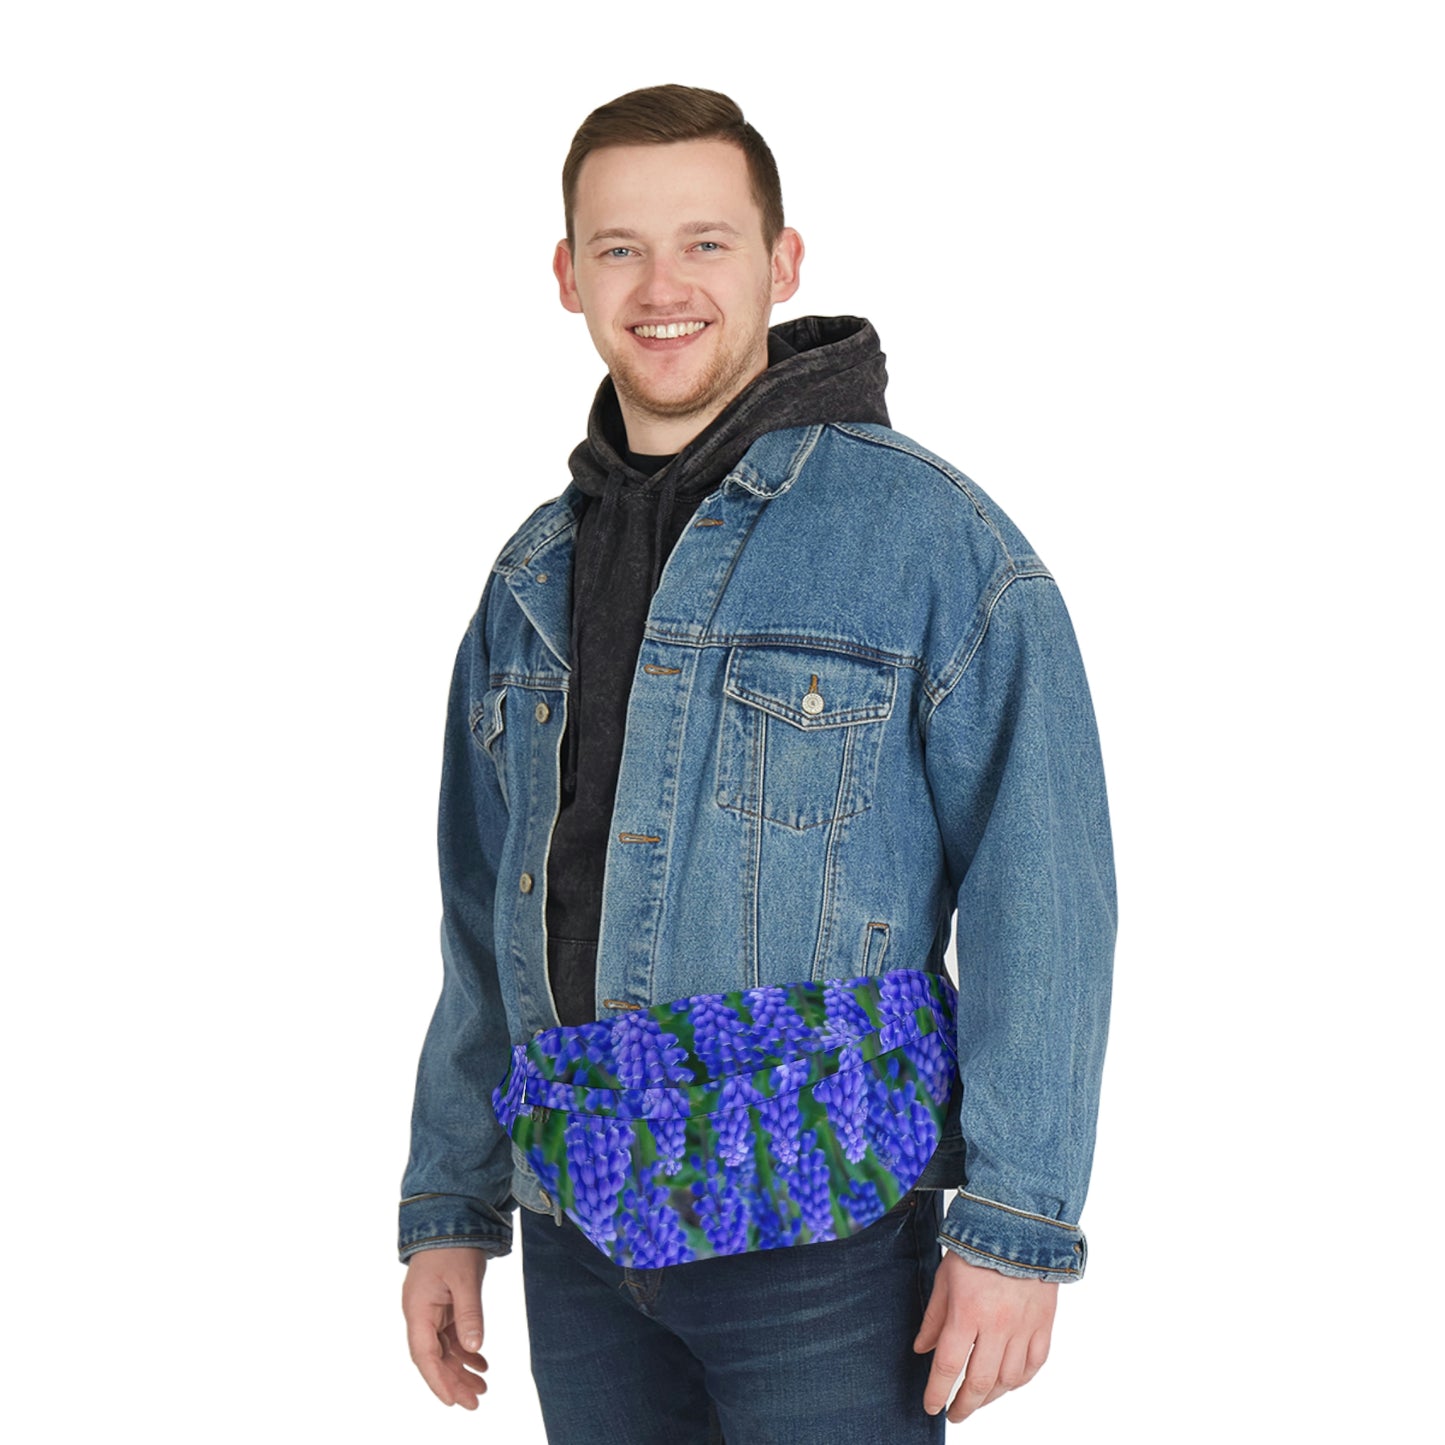 Flowers 05 Large Fanny Pack